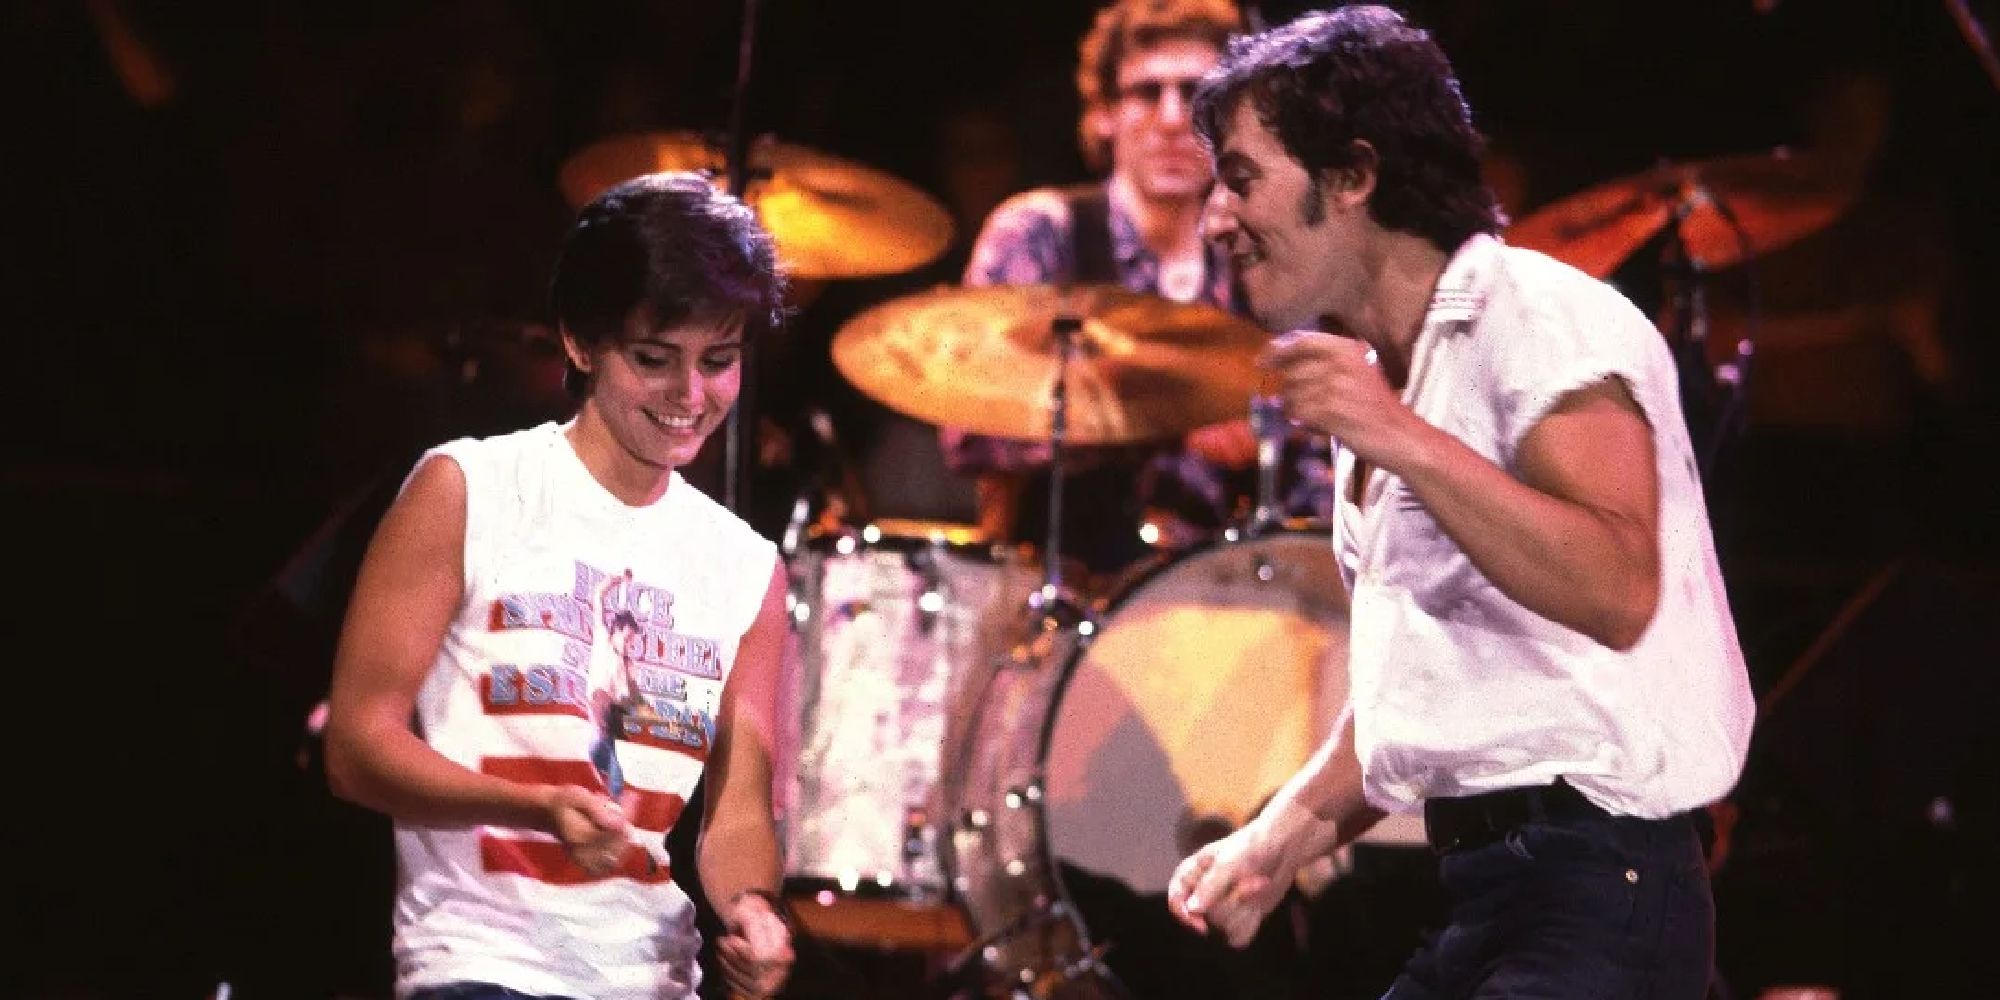 Bruce Springsteen dancing with Courtney Cox on stage in the Dancing in the Dark music video